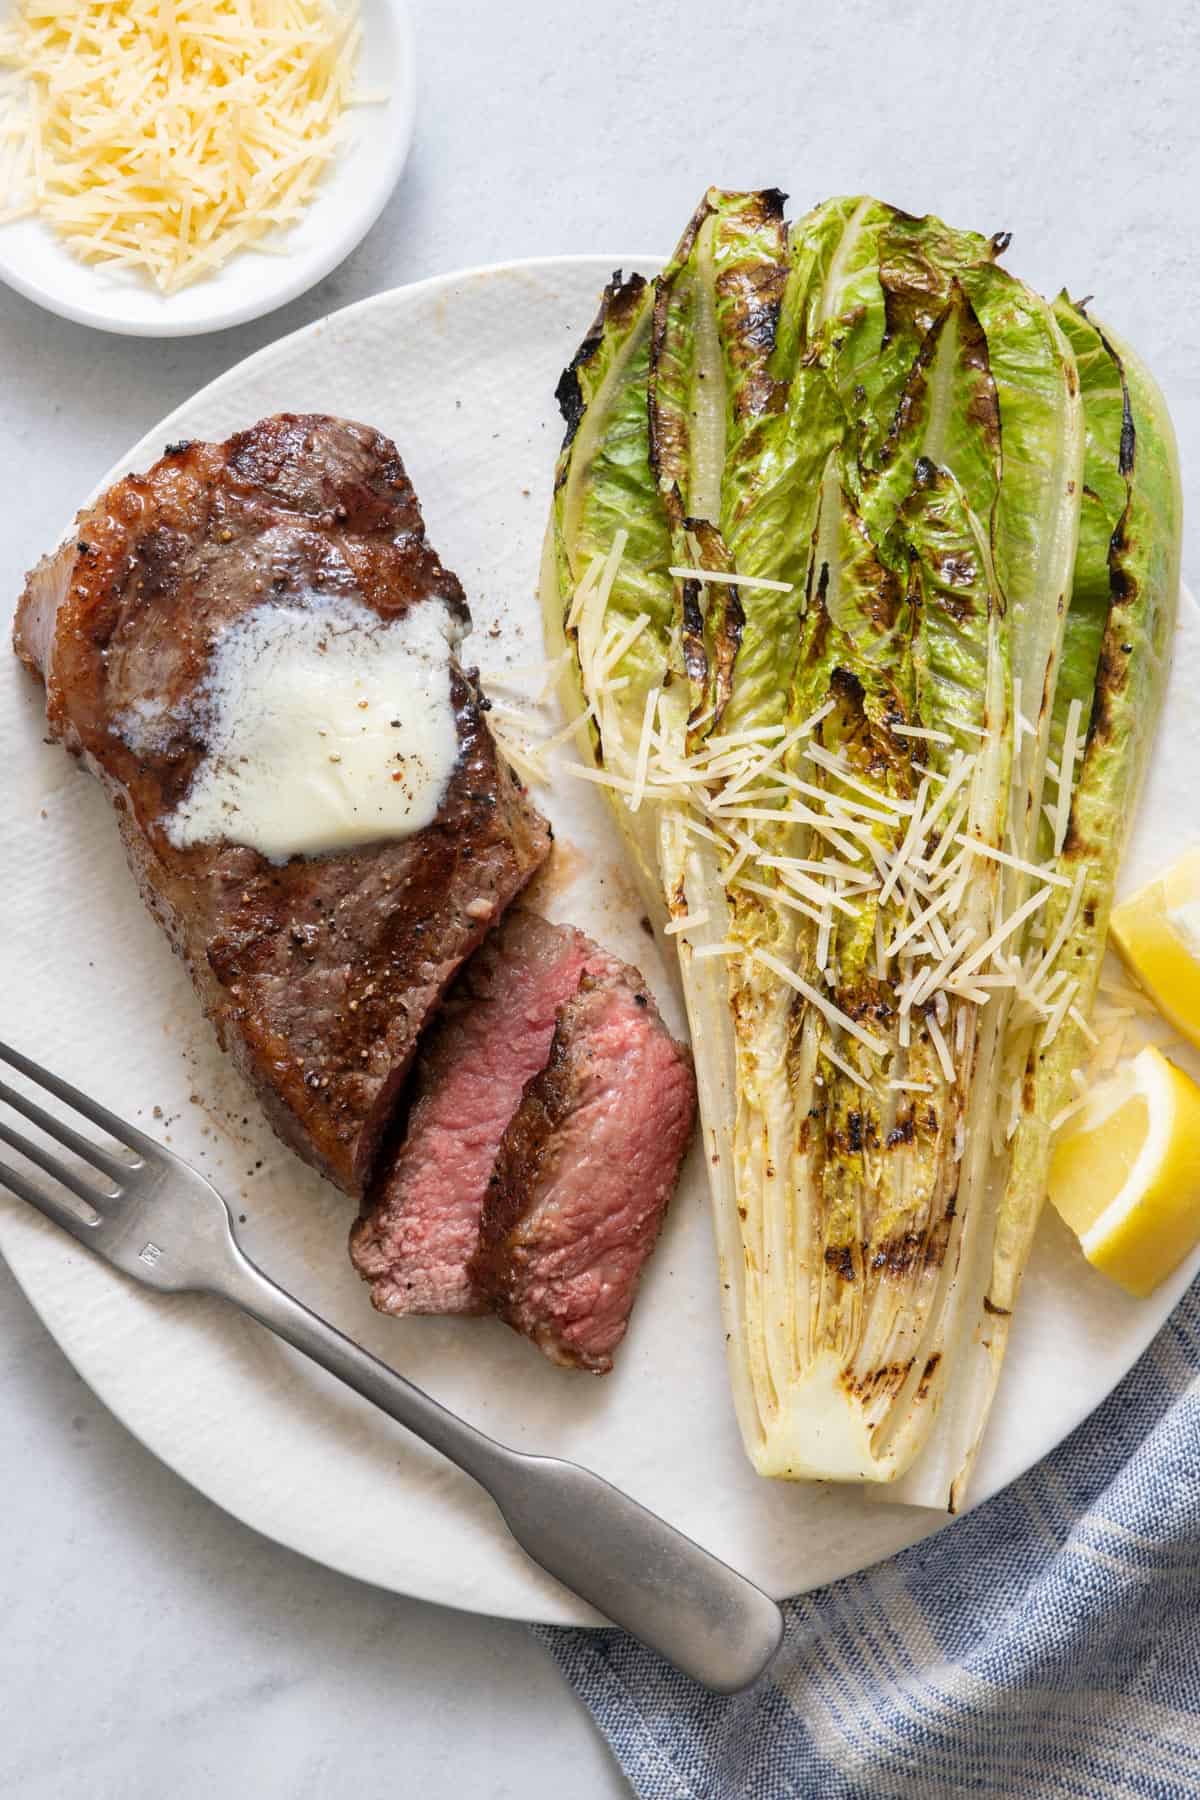 Grilled steak with two slices cut from it topped with melted butter on a large white plate with grilled romaine lettuce, lemon wedges, parmesan, and fork.